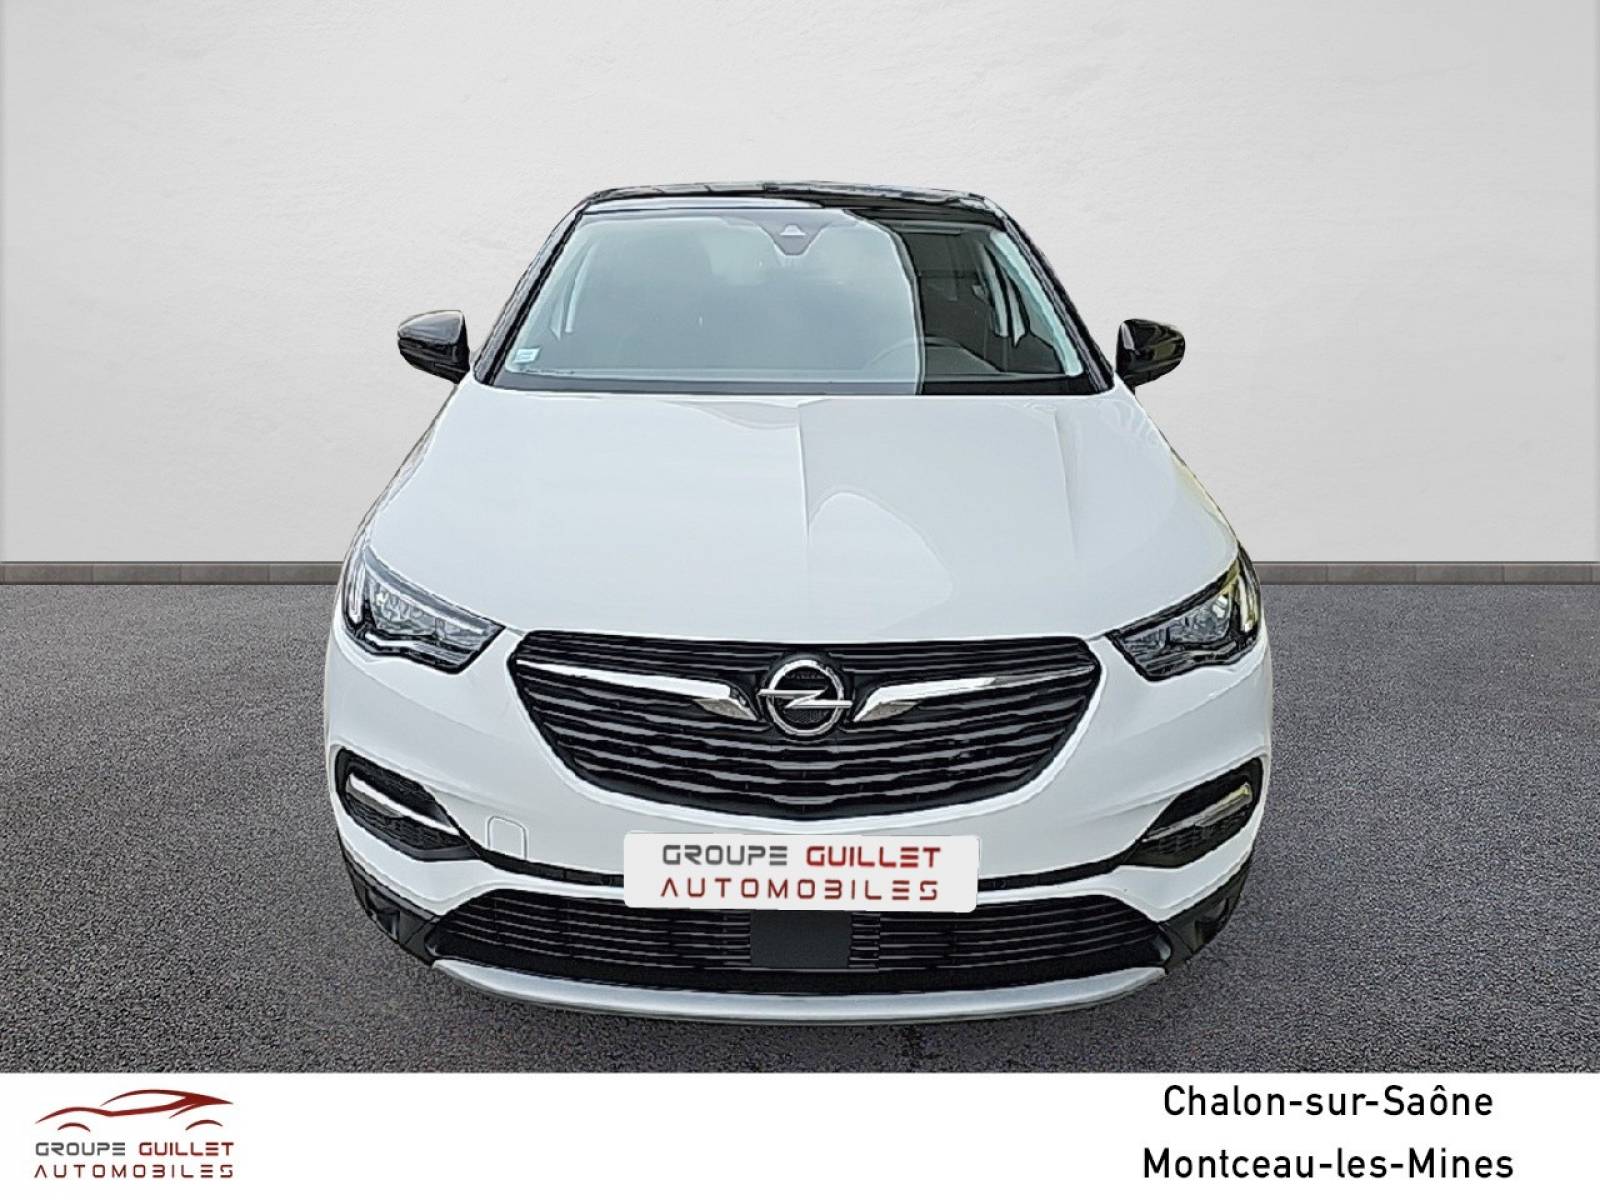 OPEL Grandland X 1.2 Turbo 130 ch - véhicule d'occasion - Groupe Guillet - Opel Magicauto Chalon - 71380 - Saint-Marcel - 2